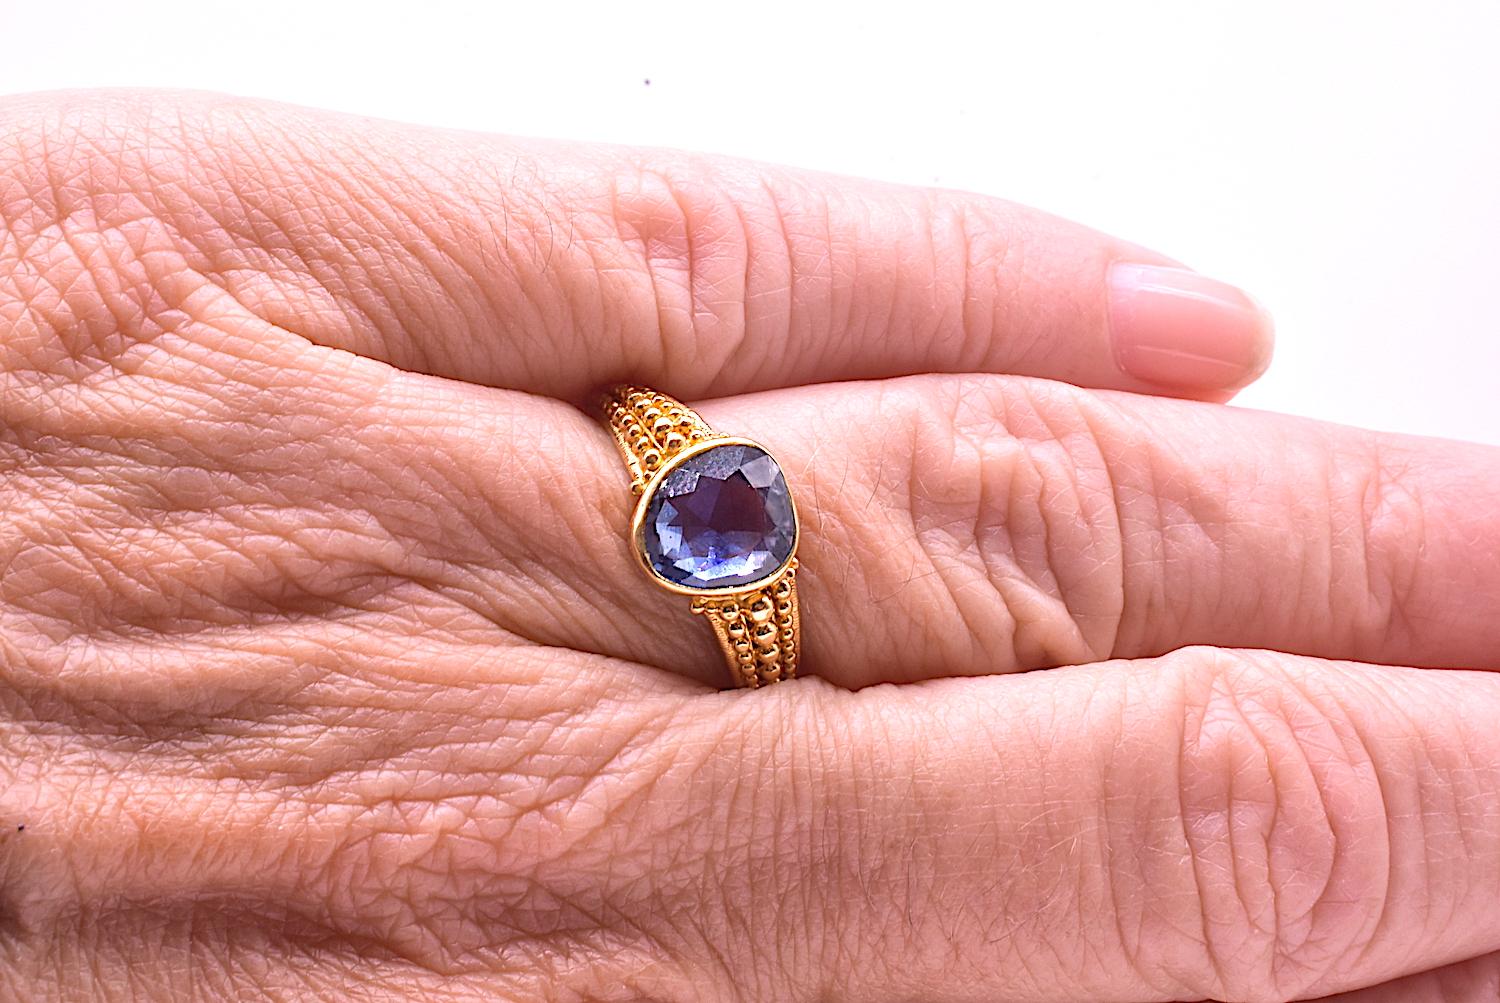 C.1830 18K Heart Shaped Natural Sapphire Ring with Gold Beadwork 1